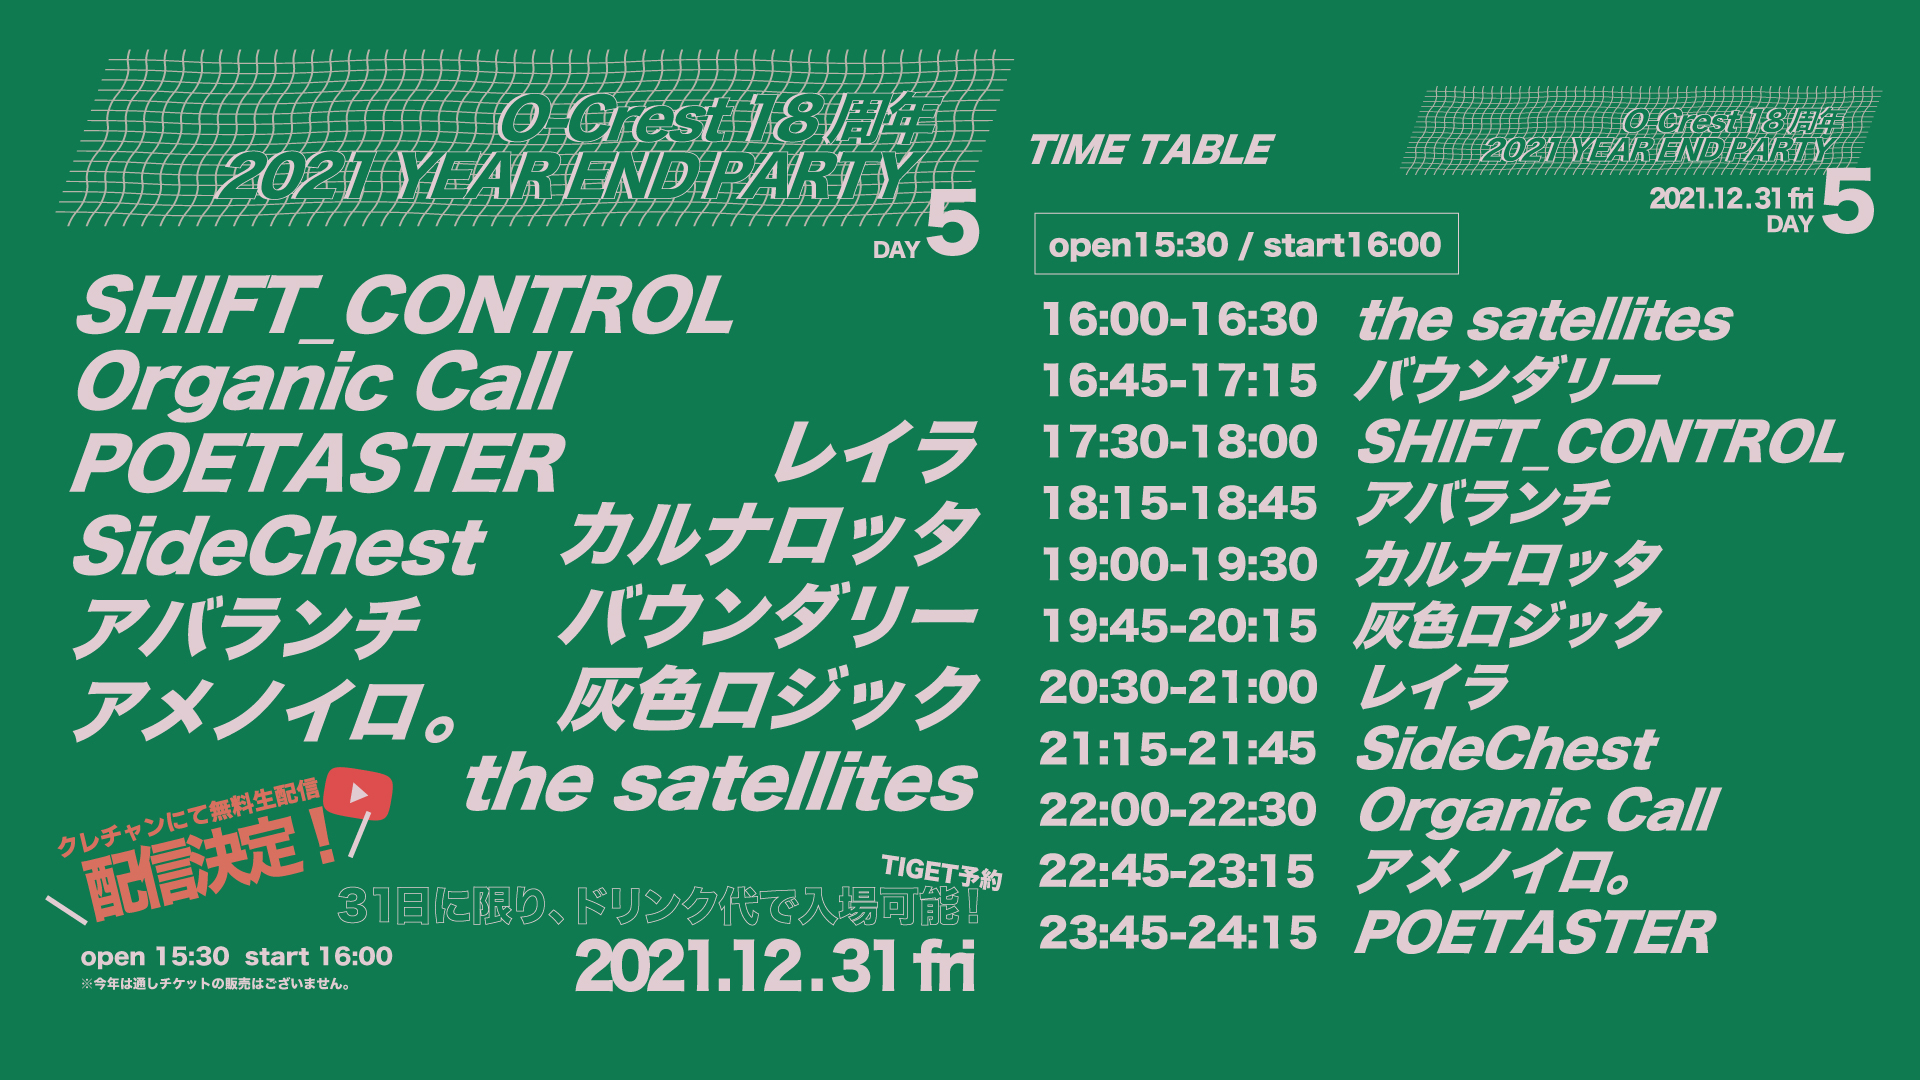 O-Crest 18周年 × 2021 YEAR END PARTY DAY 5